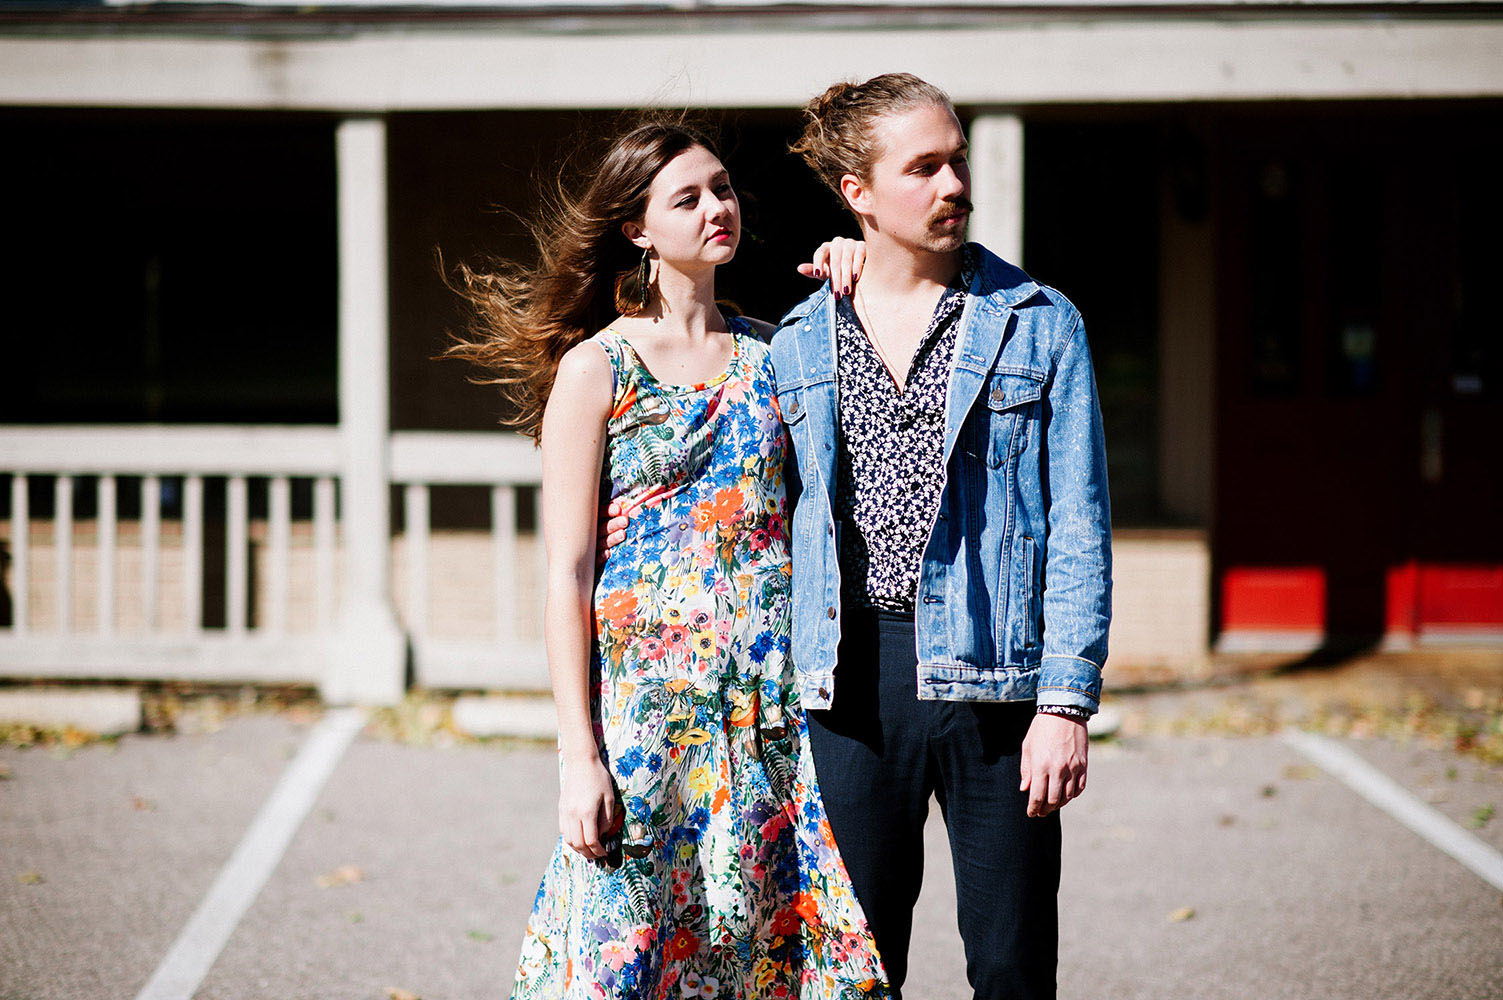 Girl with brown hair blowing in the wind, peacock feather earrings and long floral print dress and guy with man bun and jean jacket